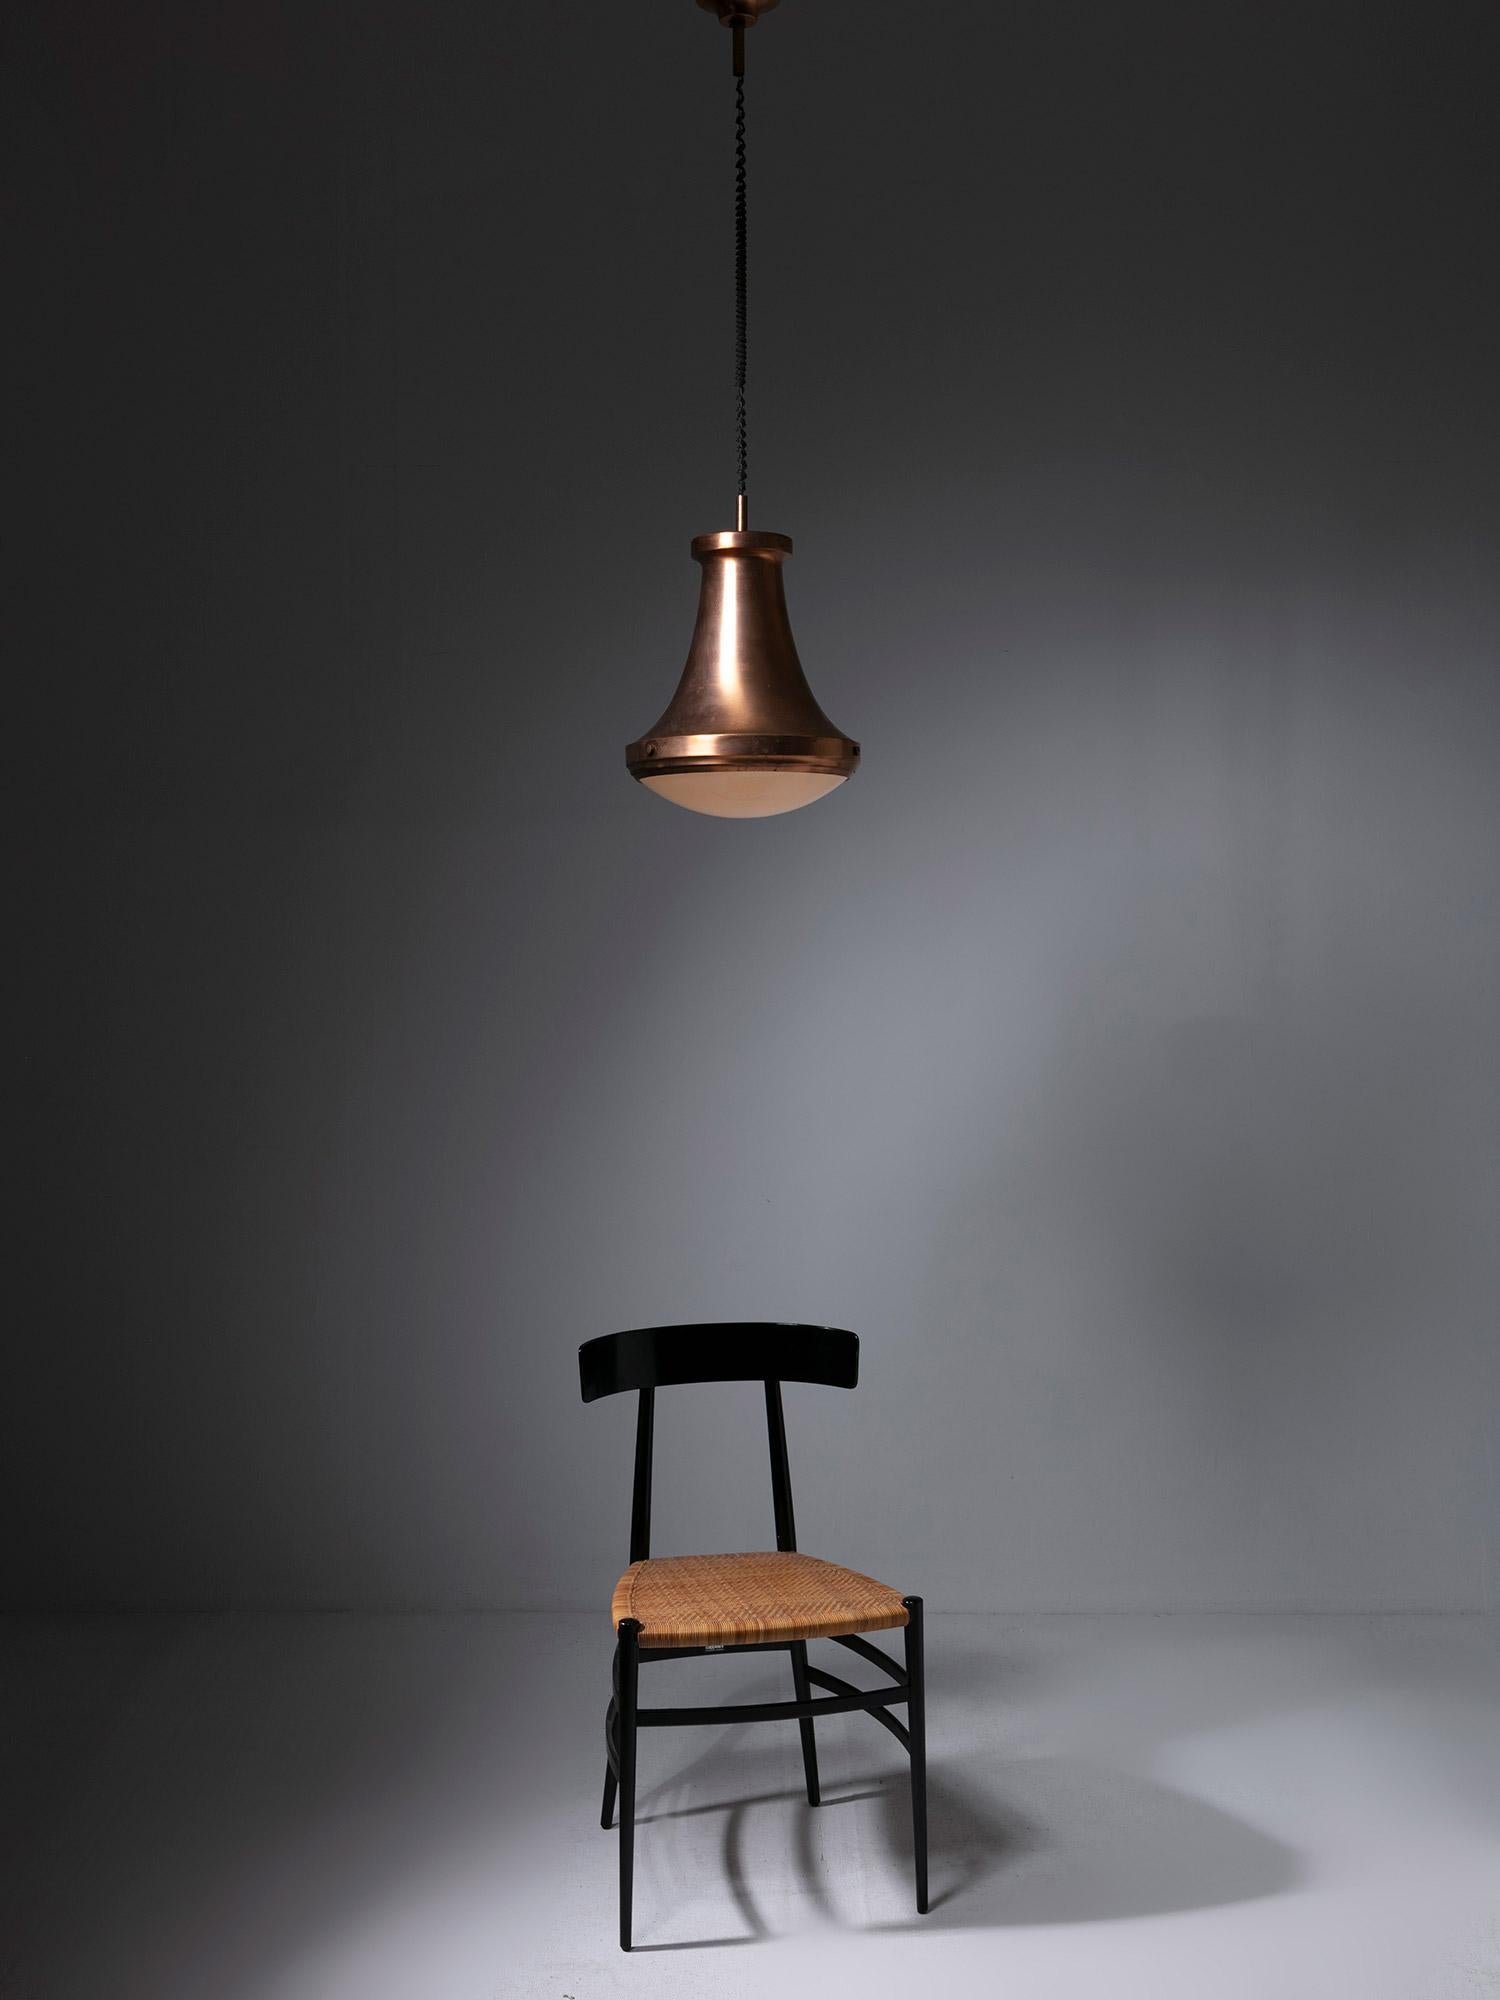 Copper Pendant Lamp with Large Metal Body, Frosted Glass Shade, Italy, 1960s For Sale 2